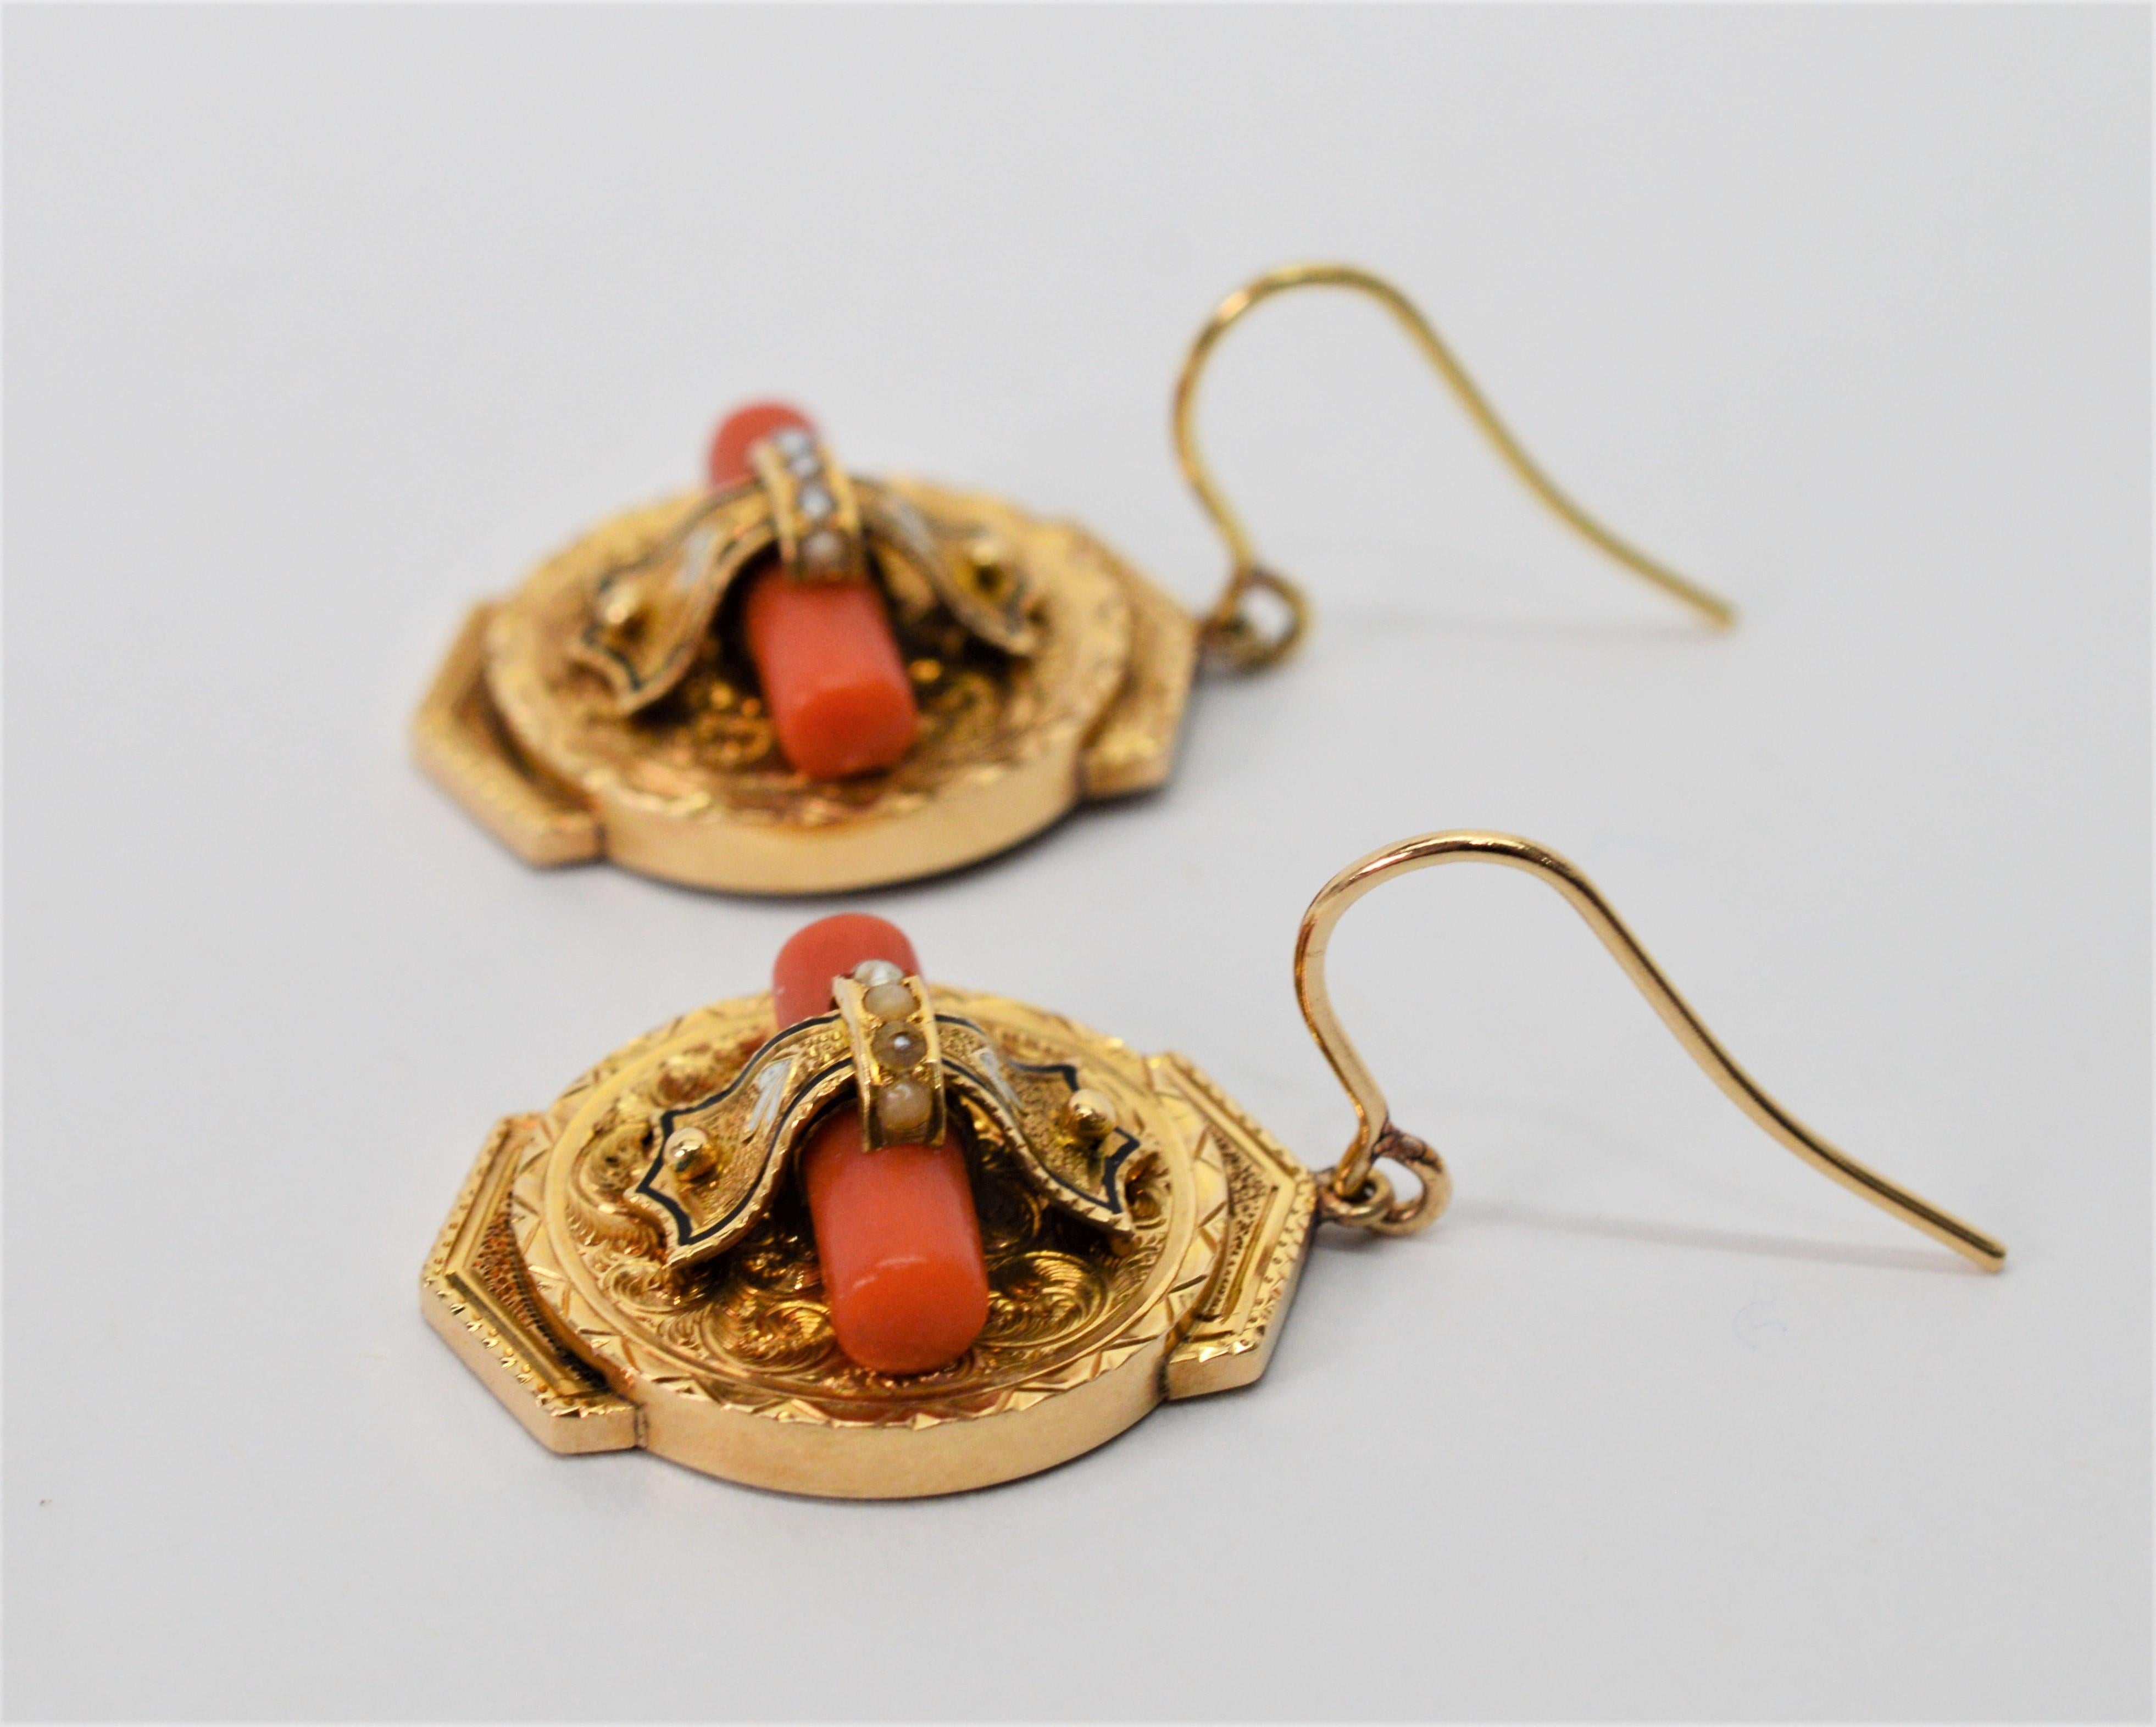 Victorian Medallion 14 Karat Yellow Gold Earrings with Coral and Pearl Accents In Good Condition For Sale In Mount Kisco, NY